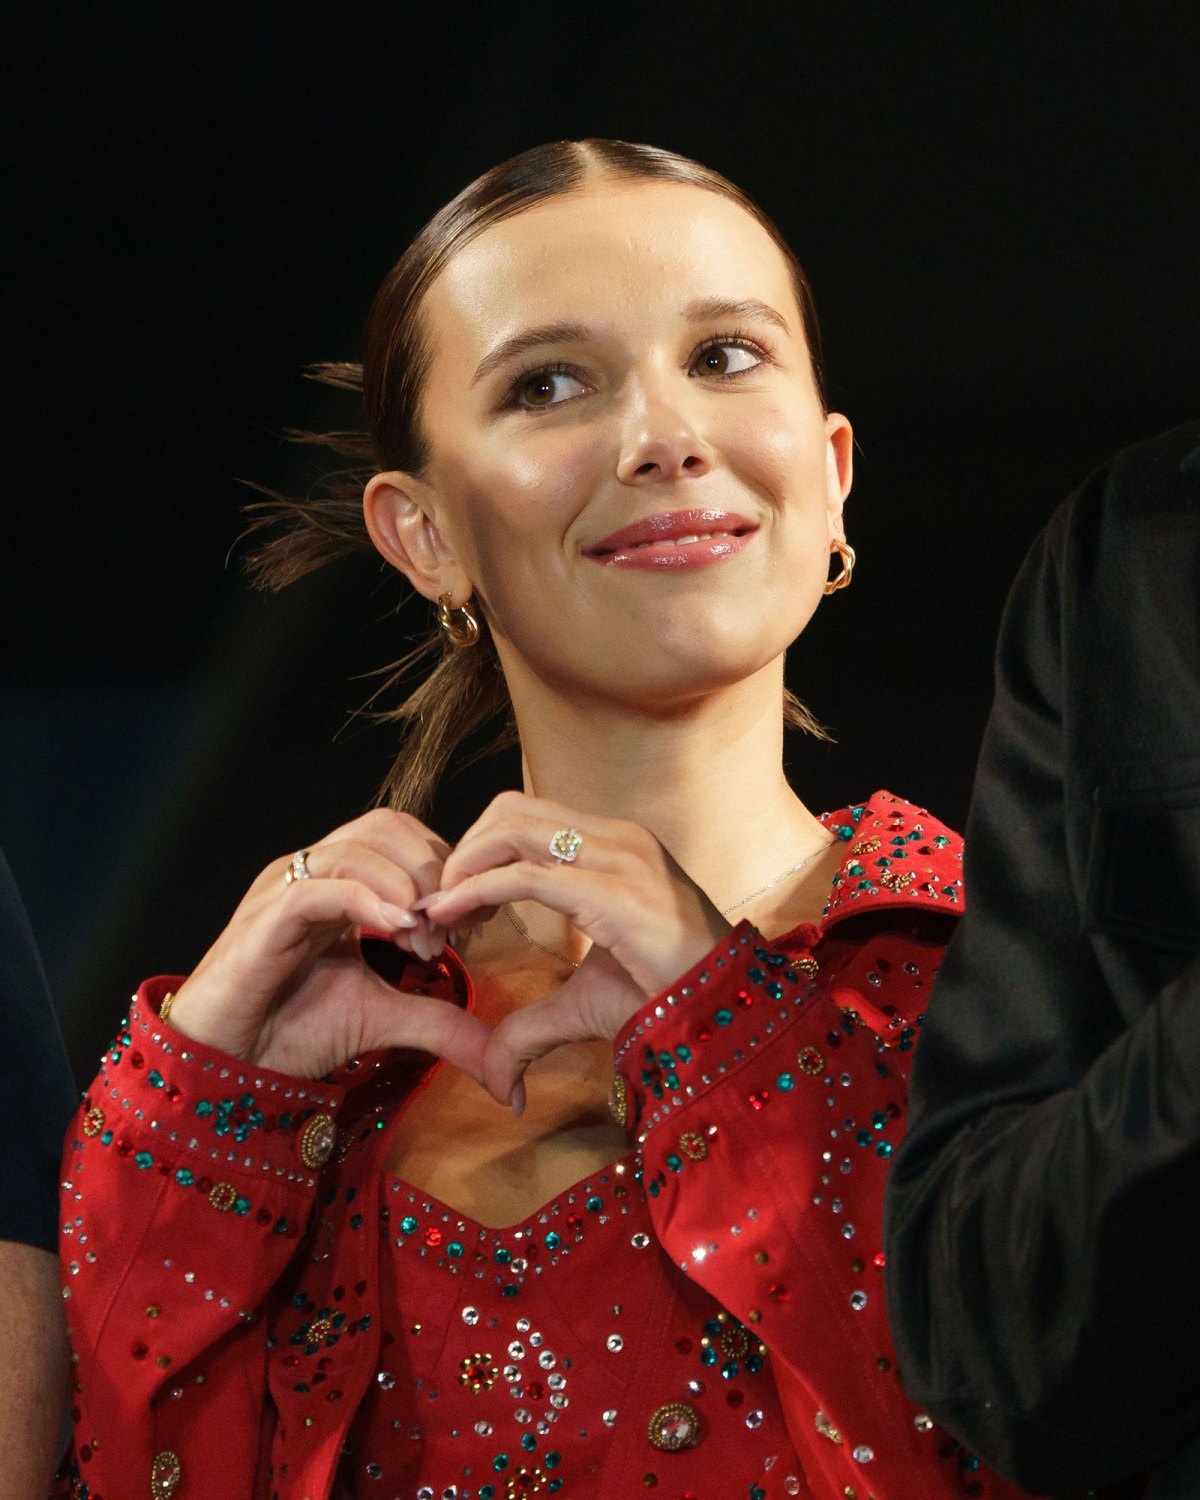 Millie Bobby Brown pairs sweats with studded Birkenstocks